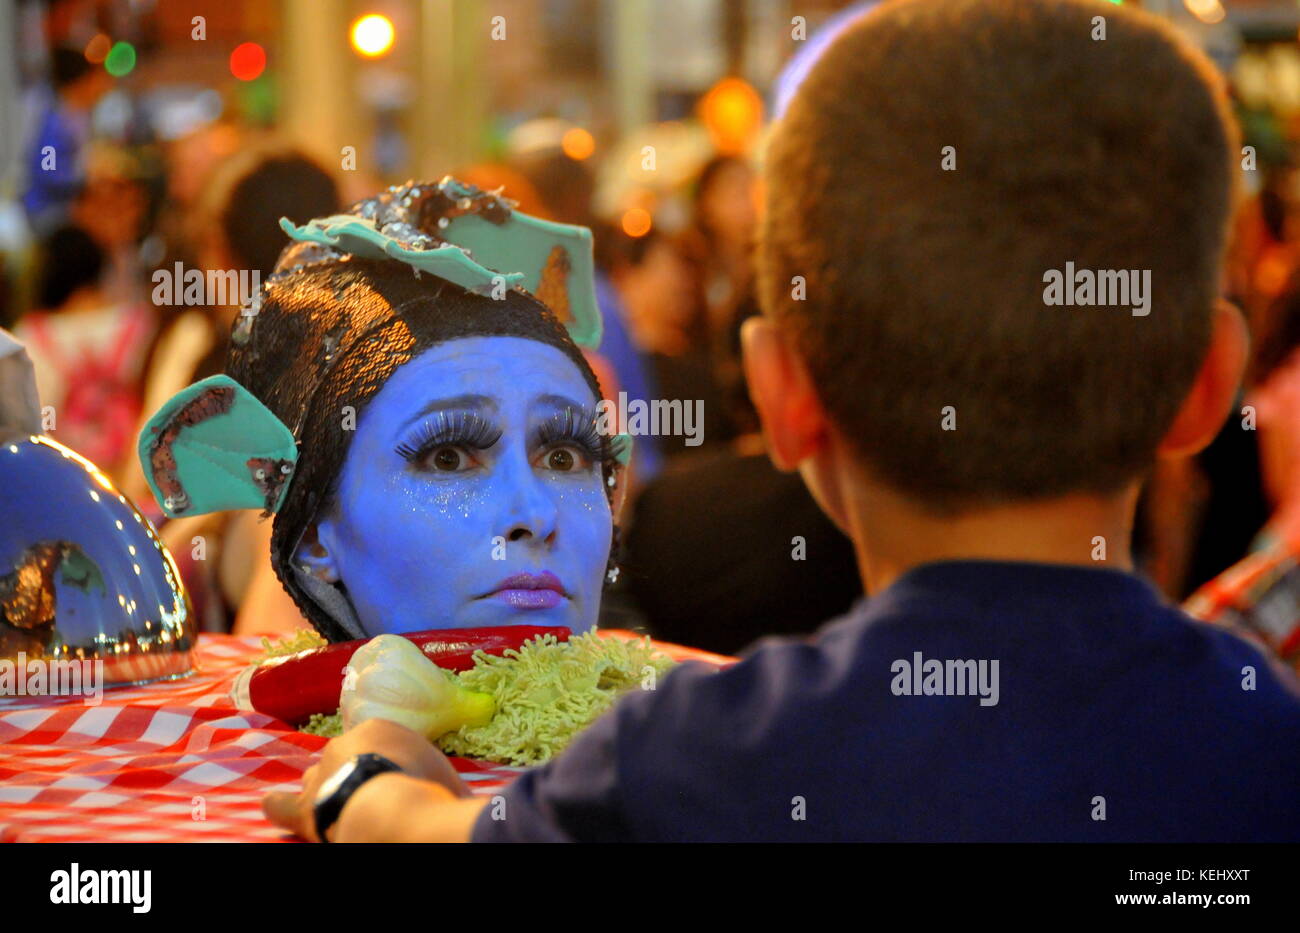 Boy surprised to see a face served on a plate during custume festival Stock Photo